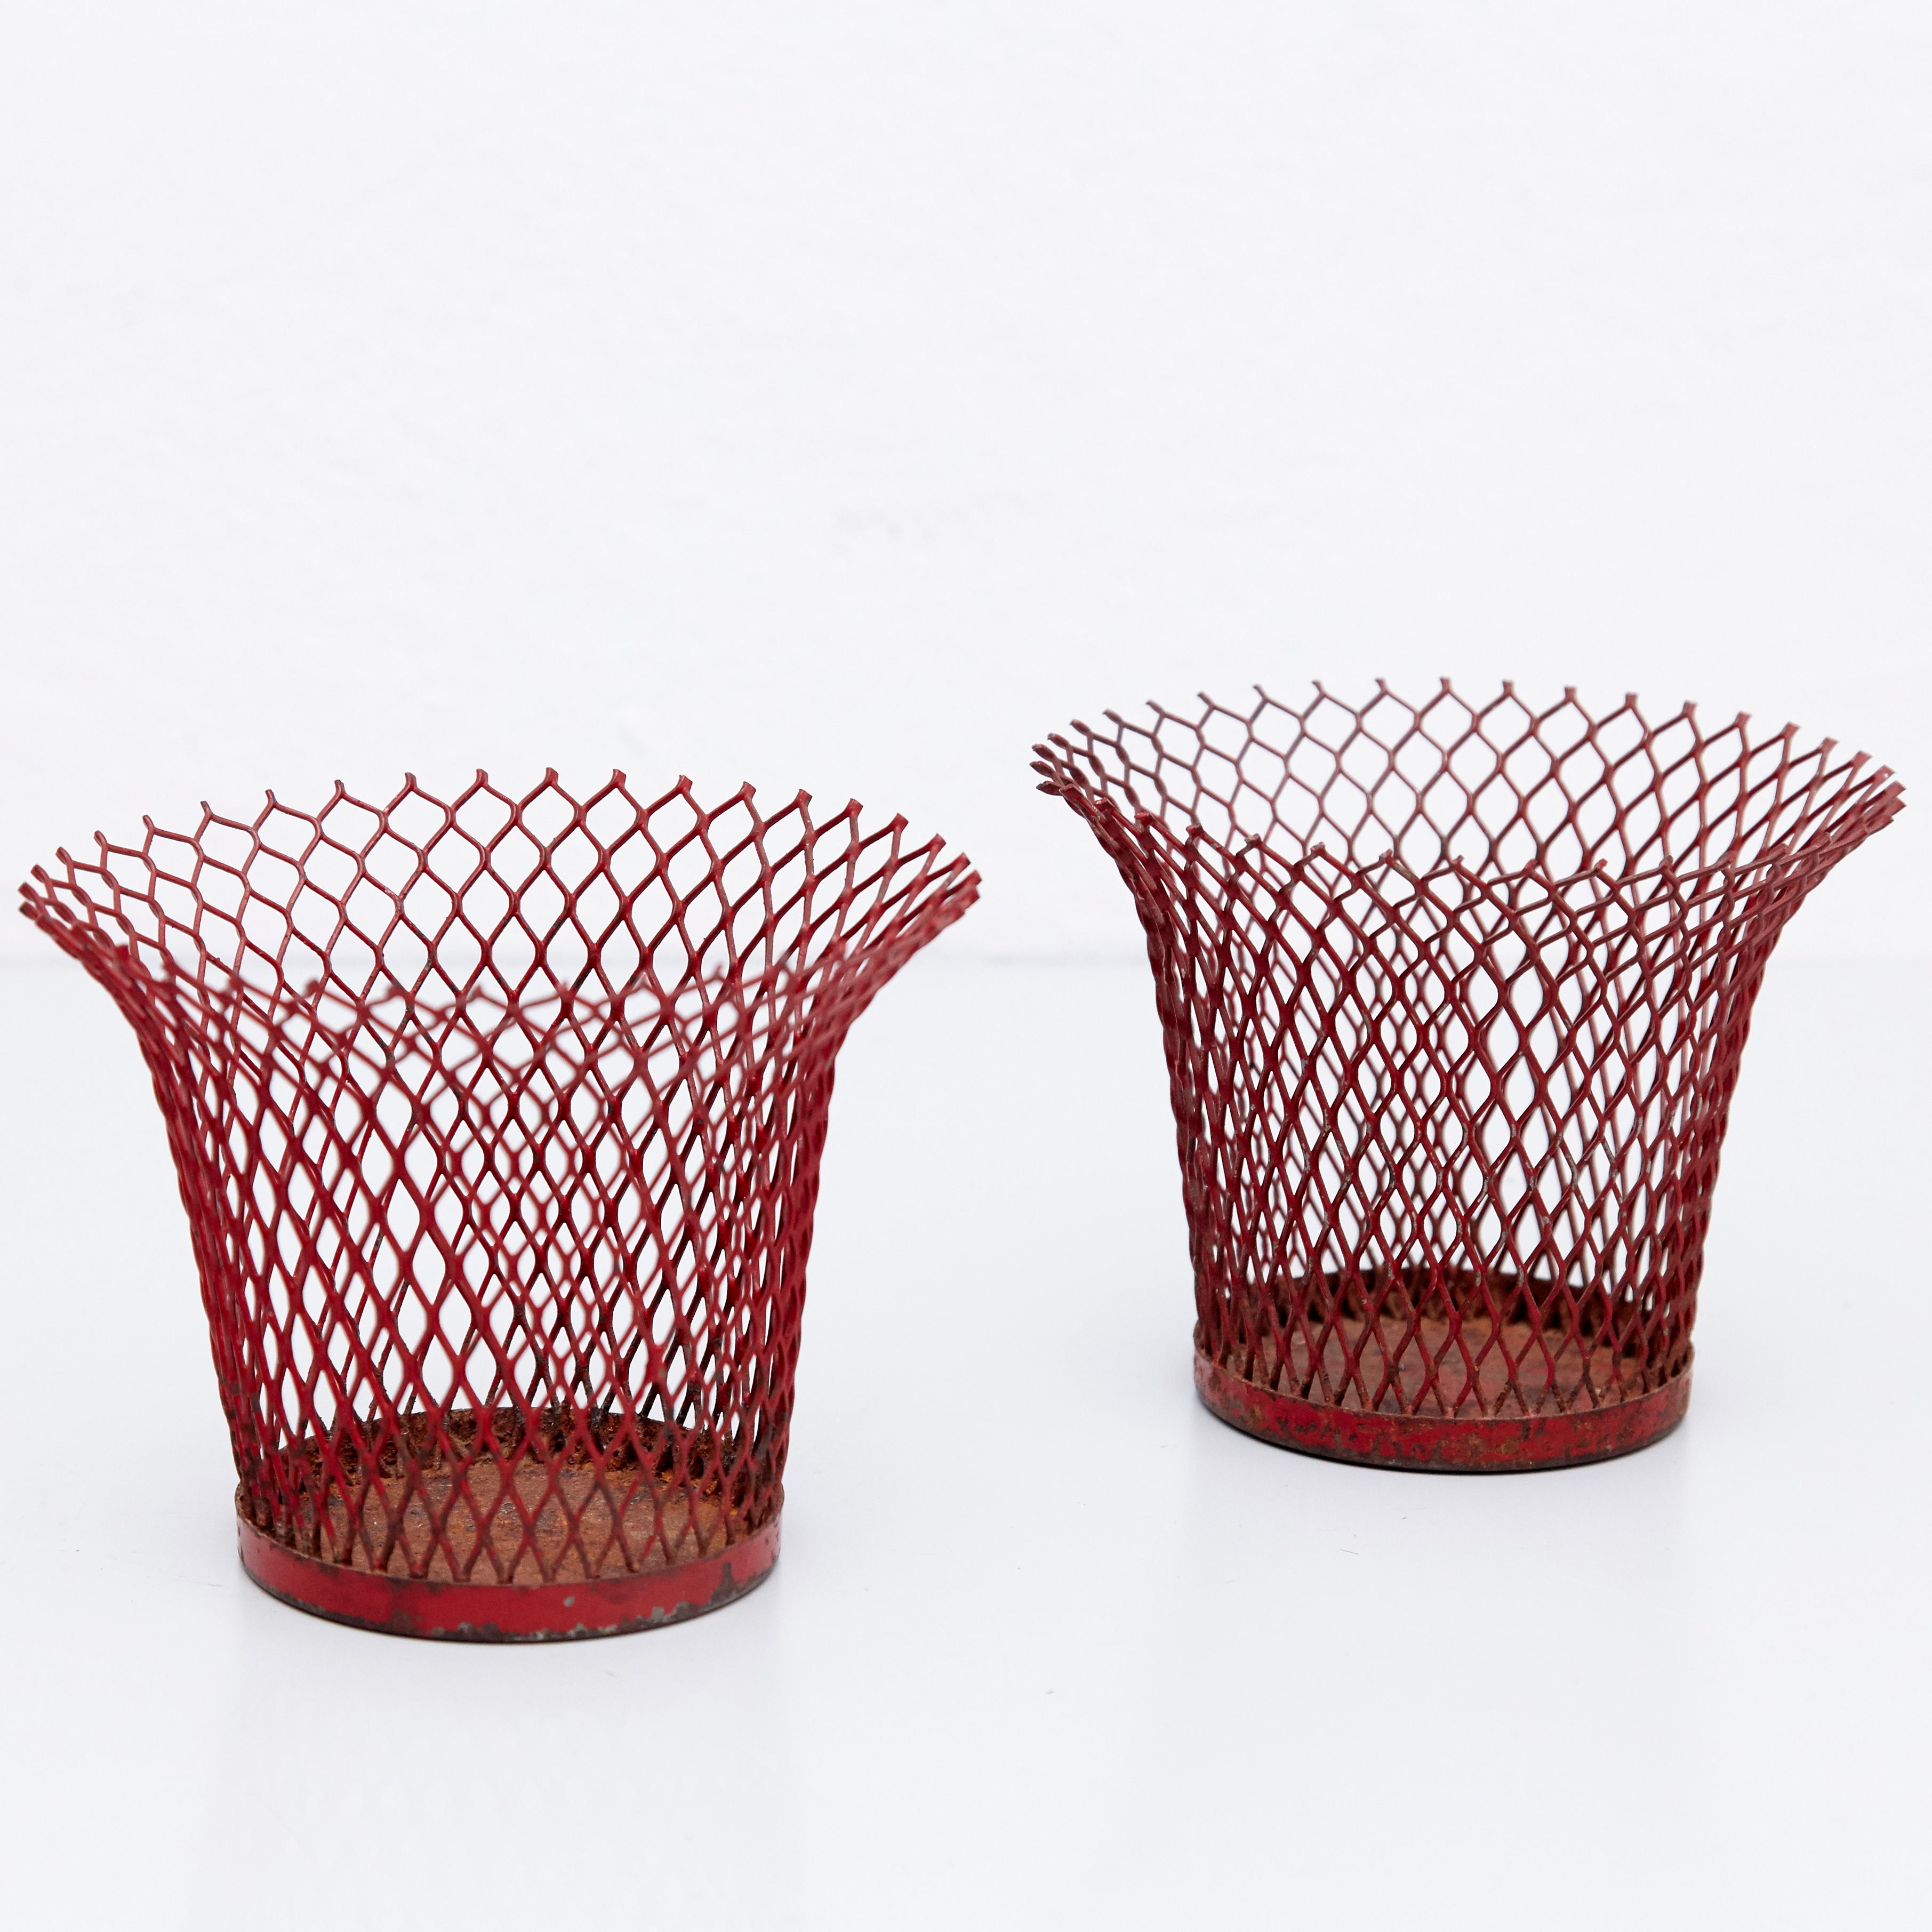 Enameled metal baskets designed by Mathieu Mategot.
Manufactured by Ateliers Mategot (France,) circa 1950.
Lacquered perforated metal, it has some traces of rust.

In original condition, with wear consistent with age and use, preserving a